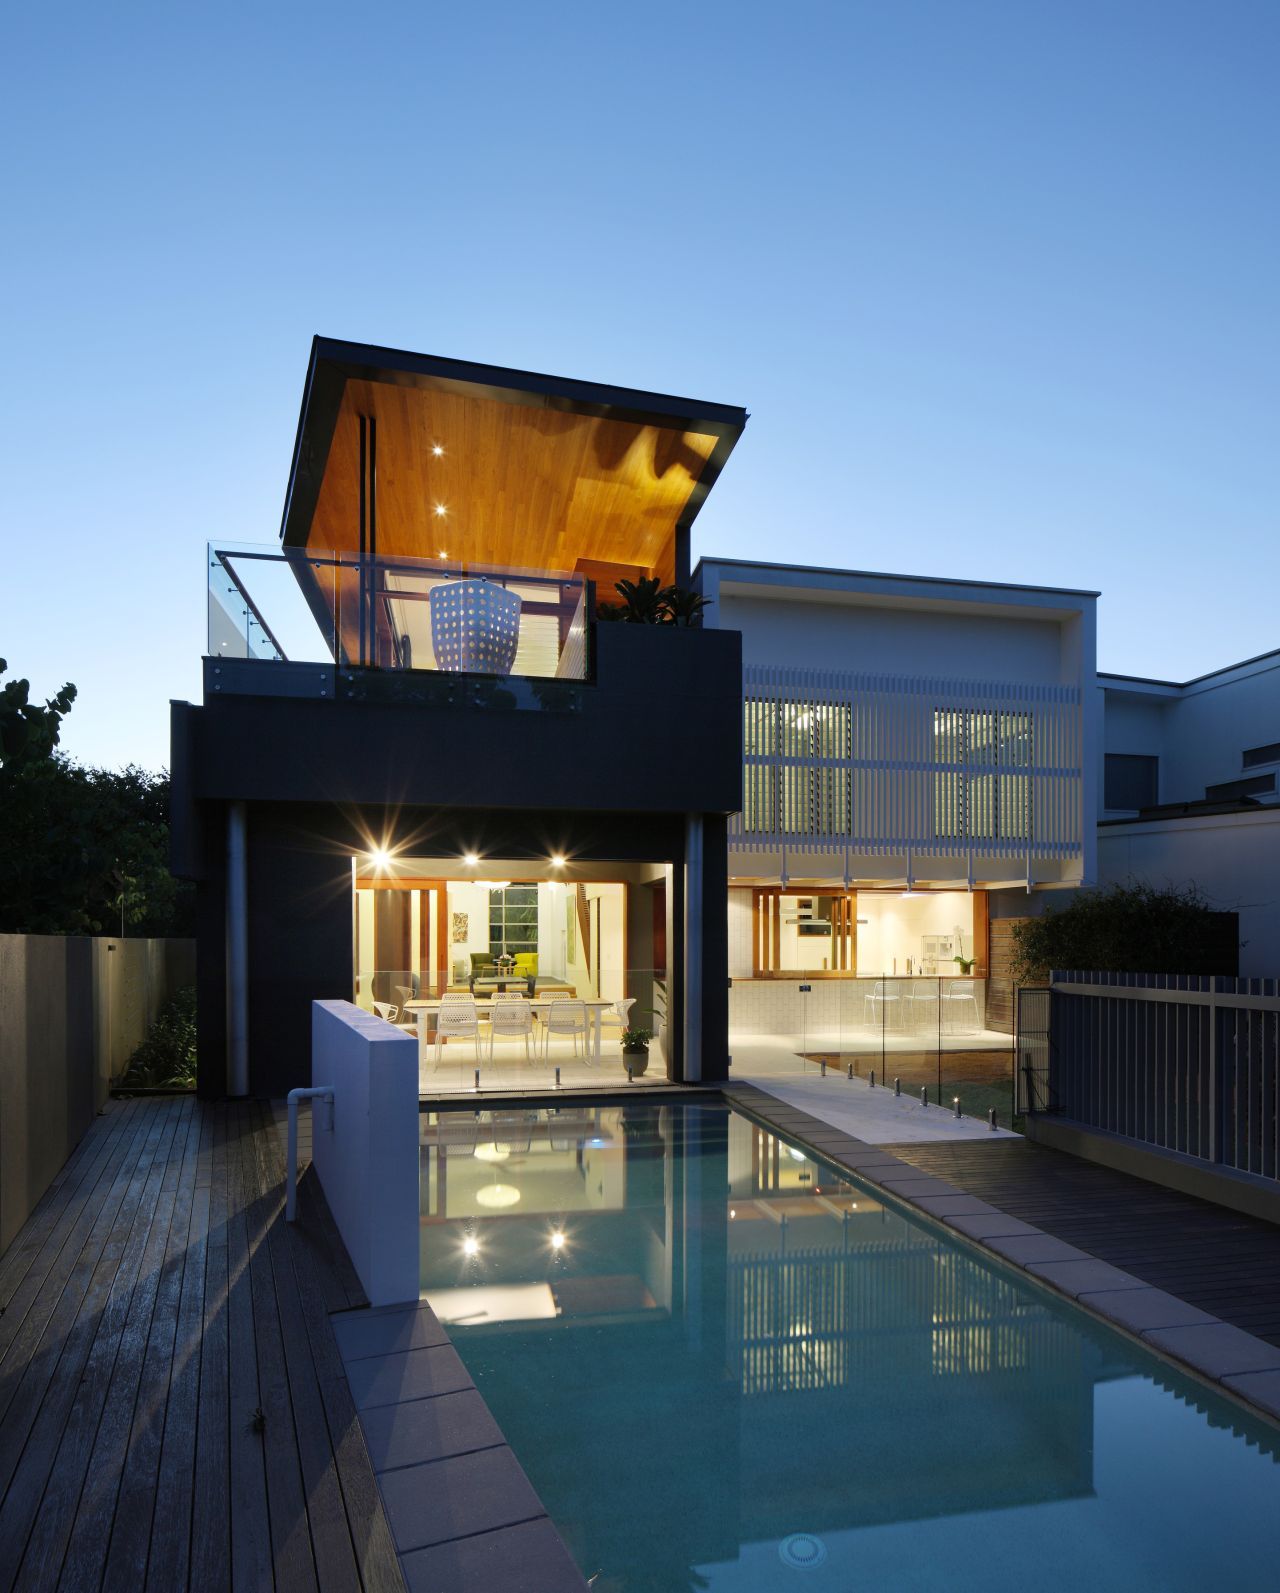 Park House Project by Shaun Lockyer Architects (26)